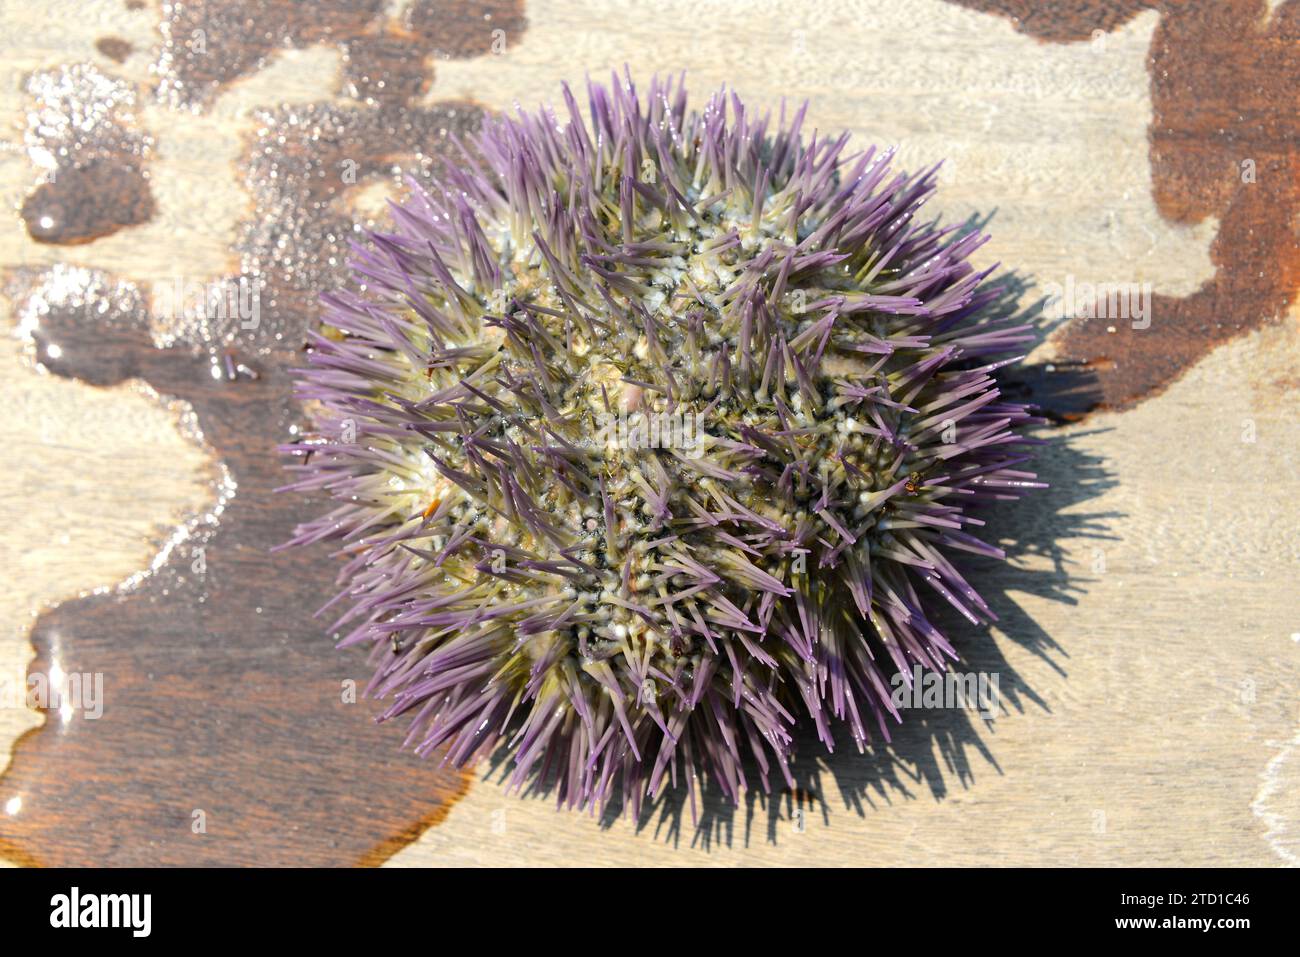 Variegated sea urchin (Lytechinus variegatus) is a sea urchin native to worms waters of western Atlantic Ocean. This photo was taken in Paraty coast, Stock Photo